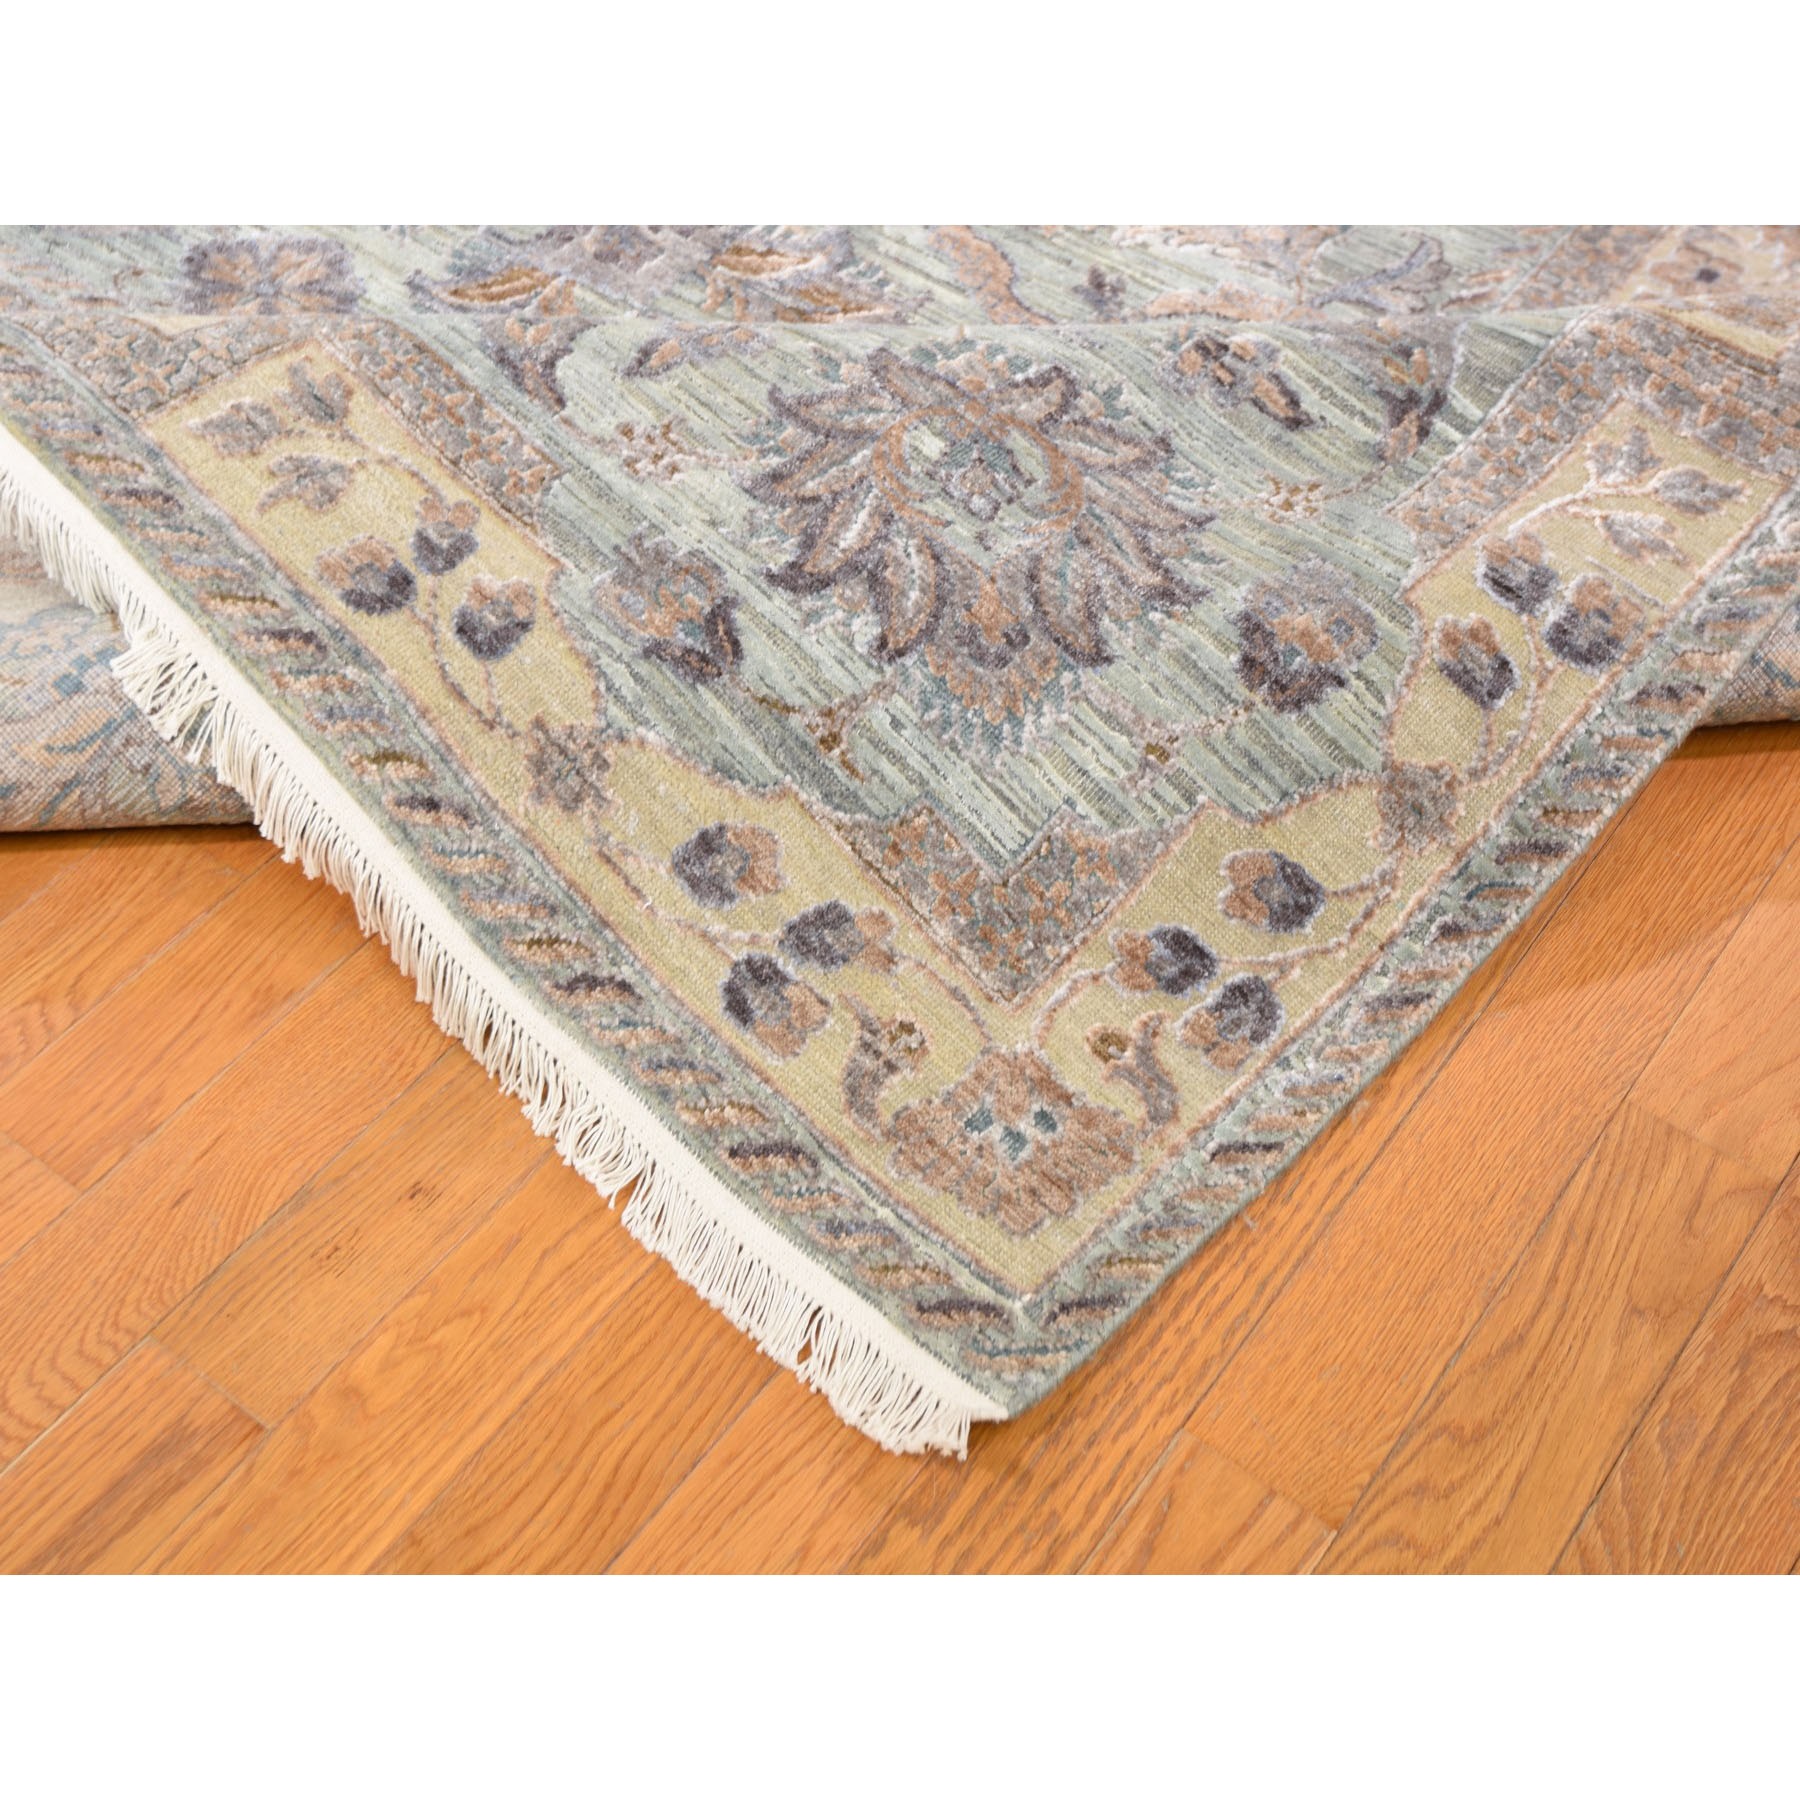 11-8 x15-3  Oversized Light Green Pure Silk With Textured Wool Mughal Design Hand Knotted Oriental Rug 